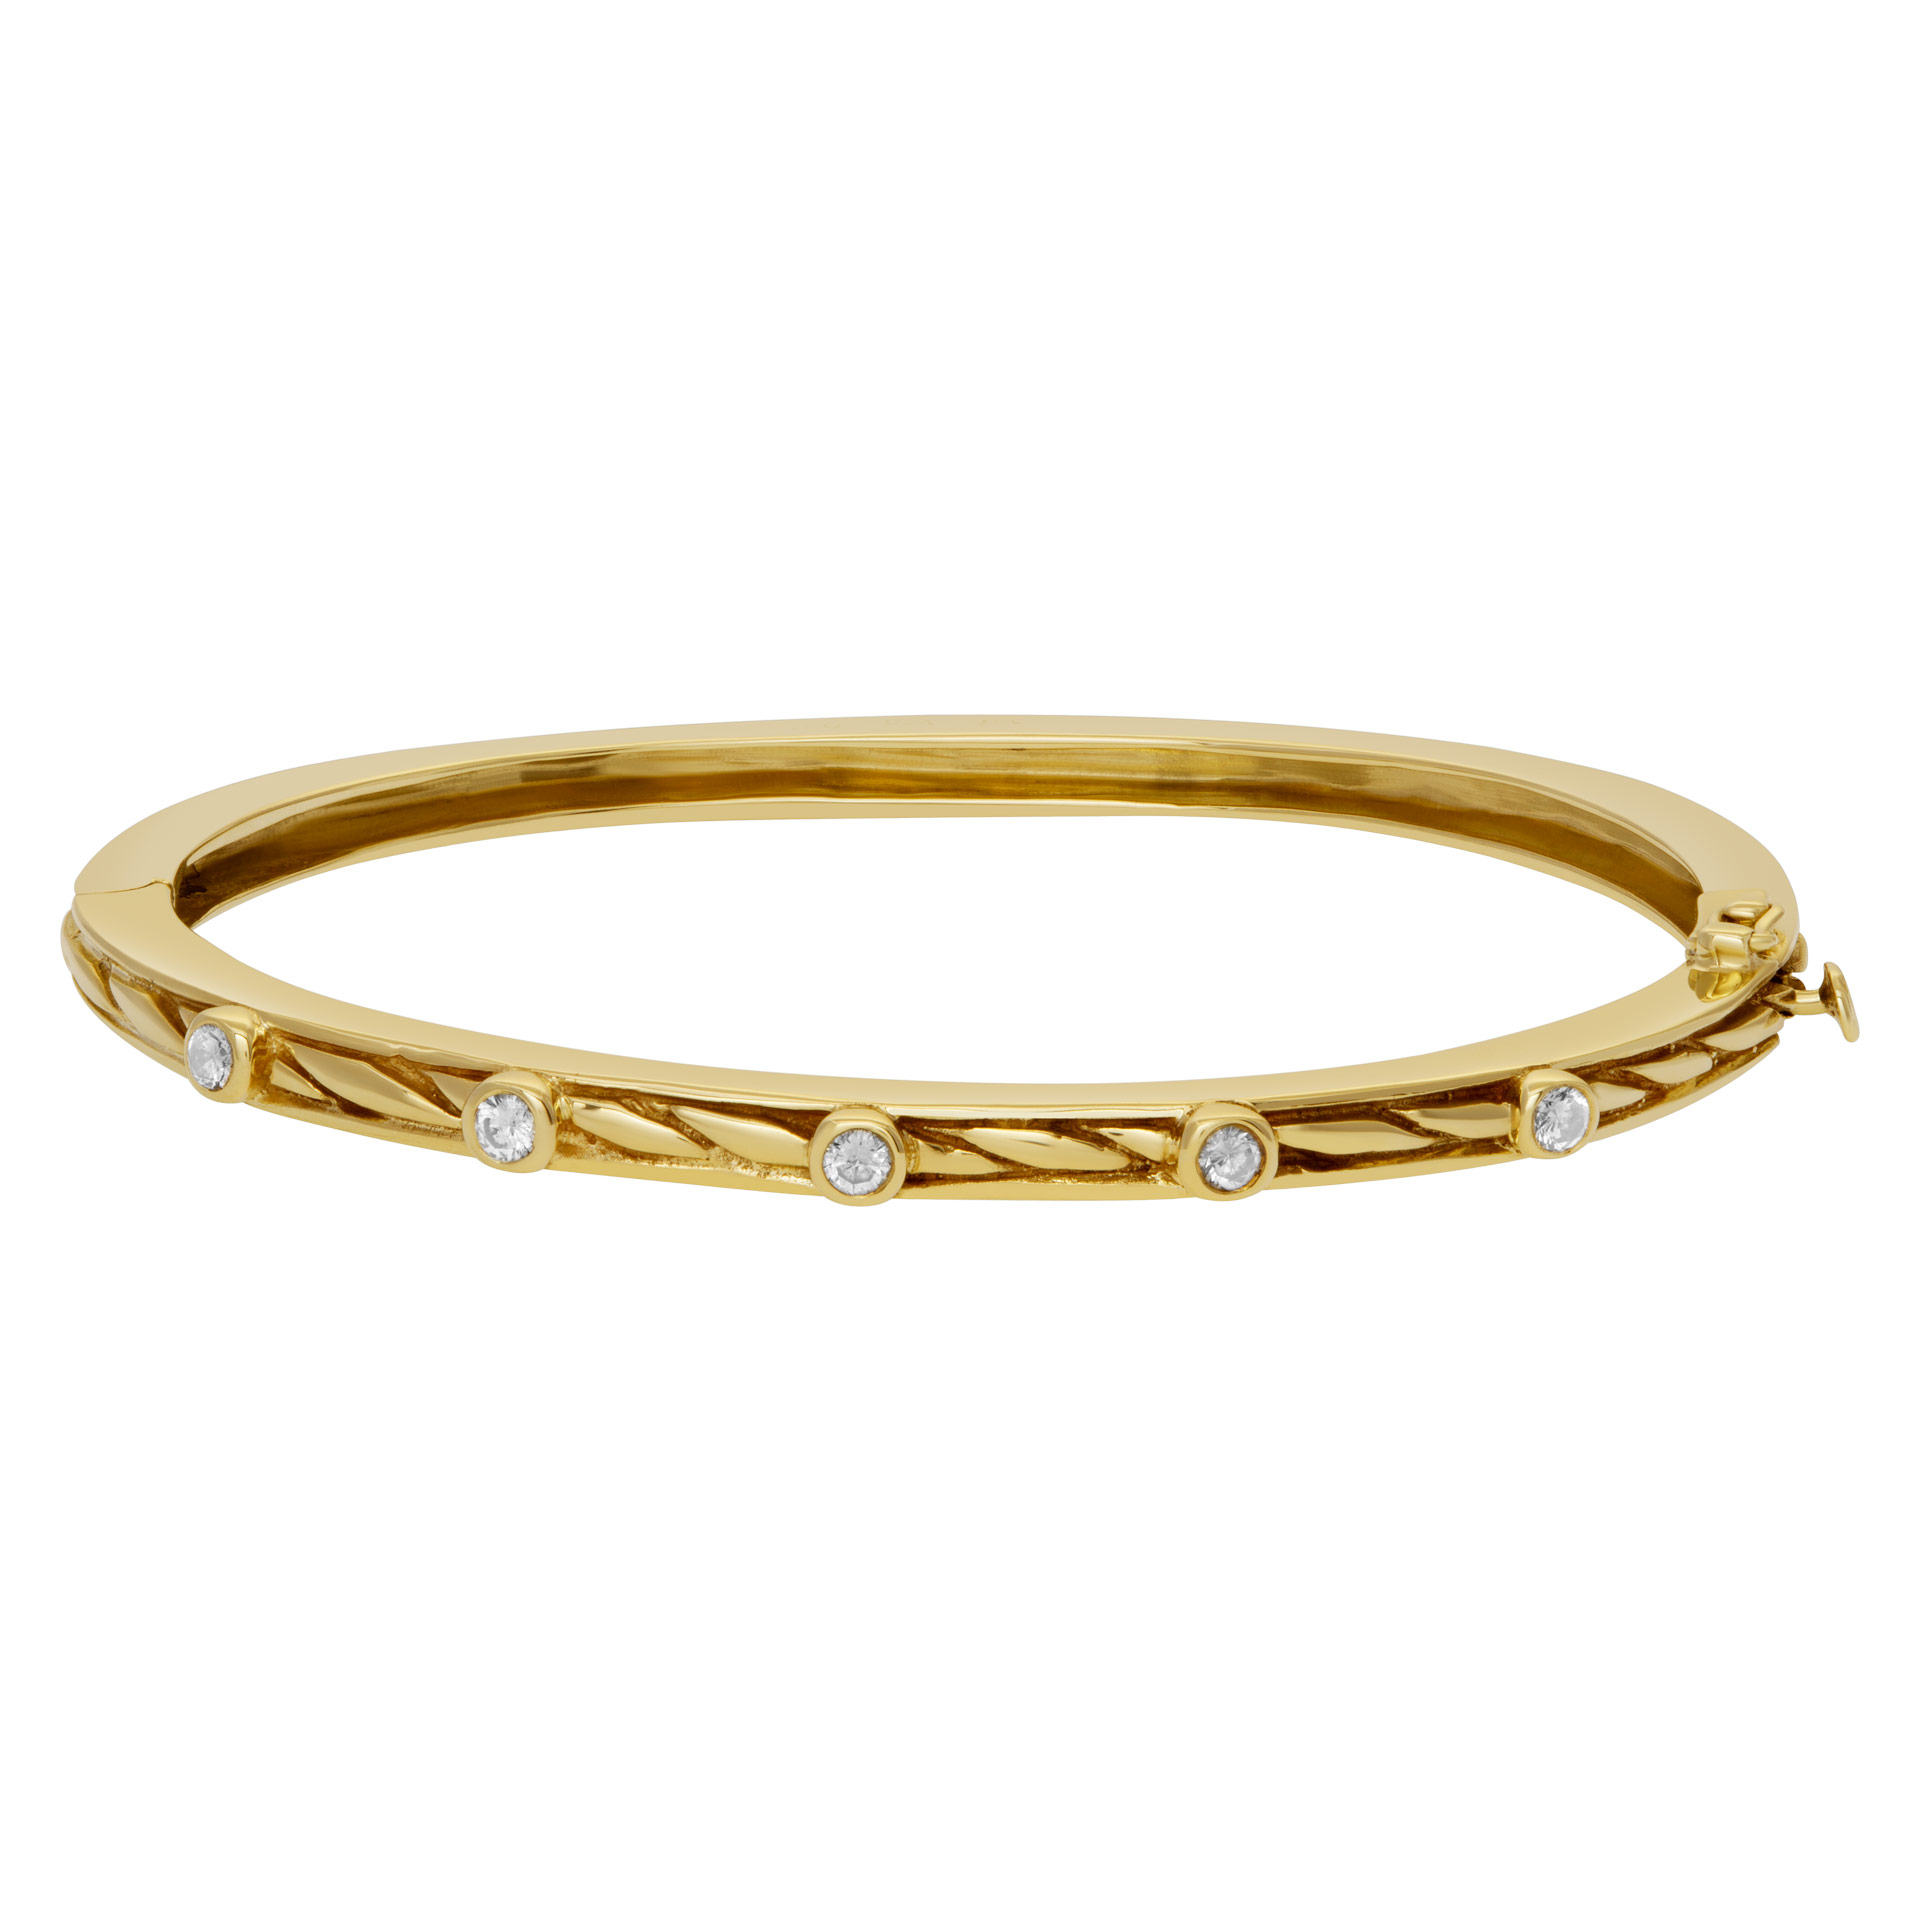 Bangle bracelet with 5 swirls in 14k yellow gold and diamonds image 1